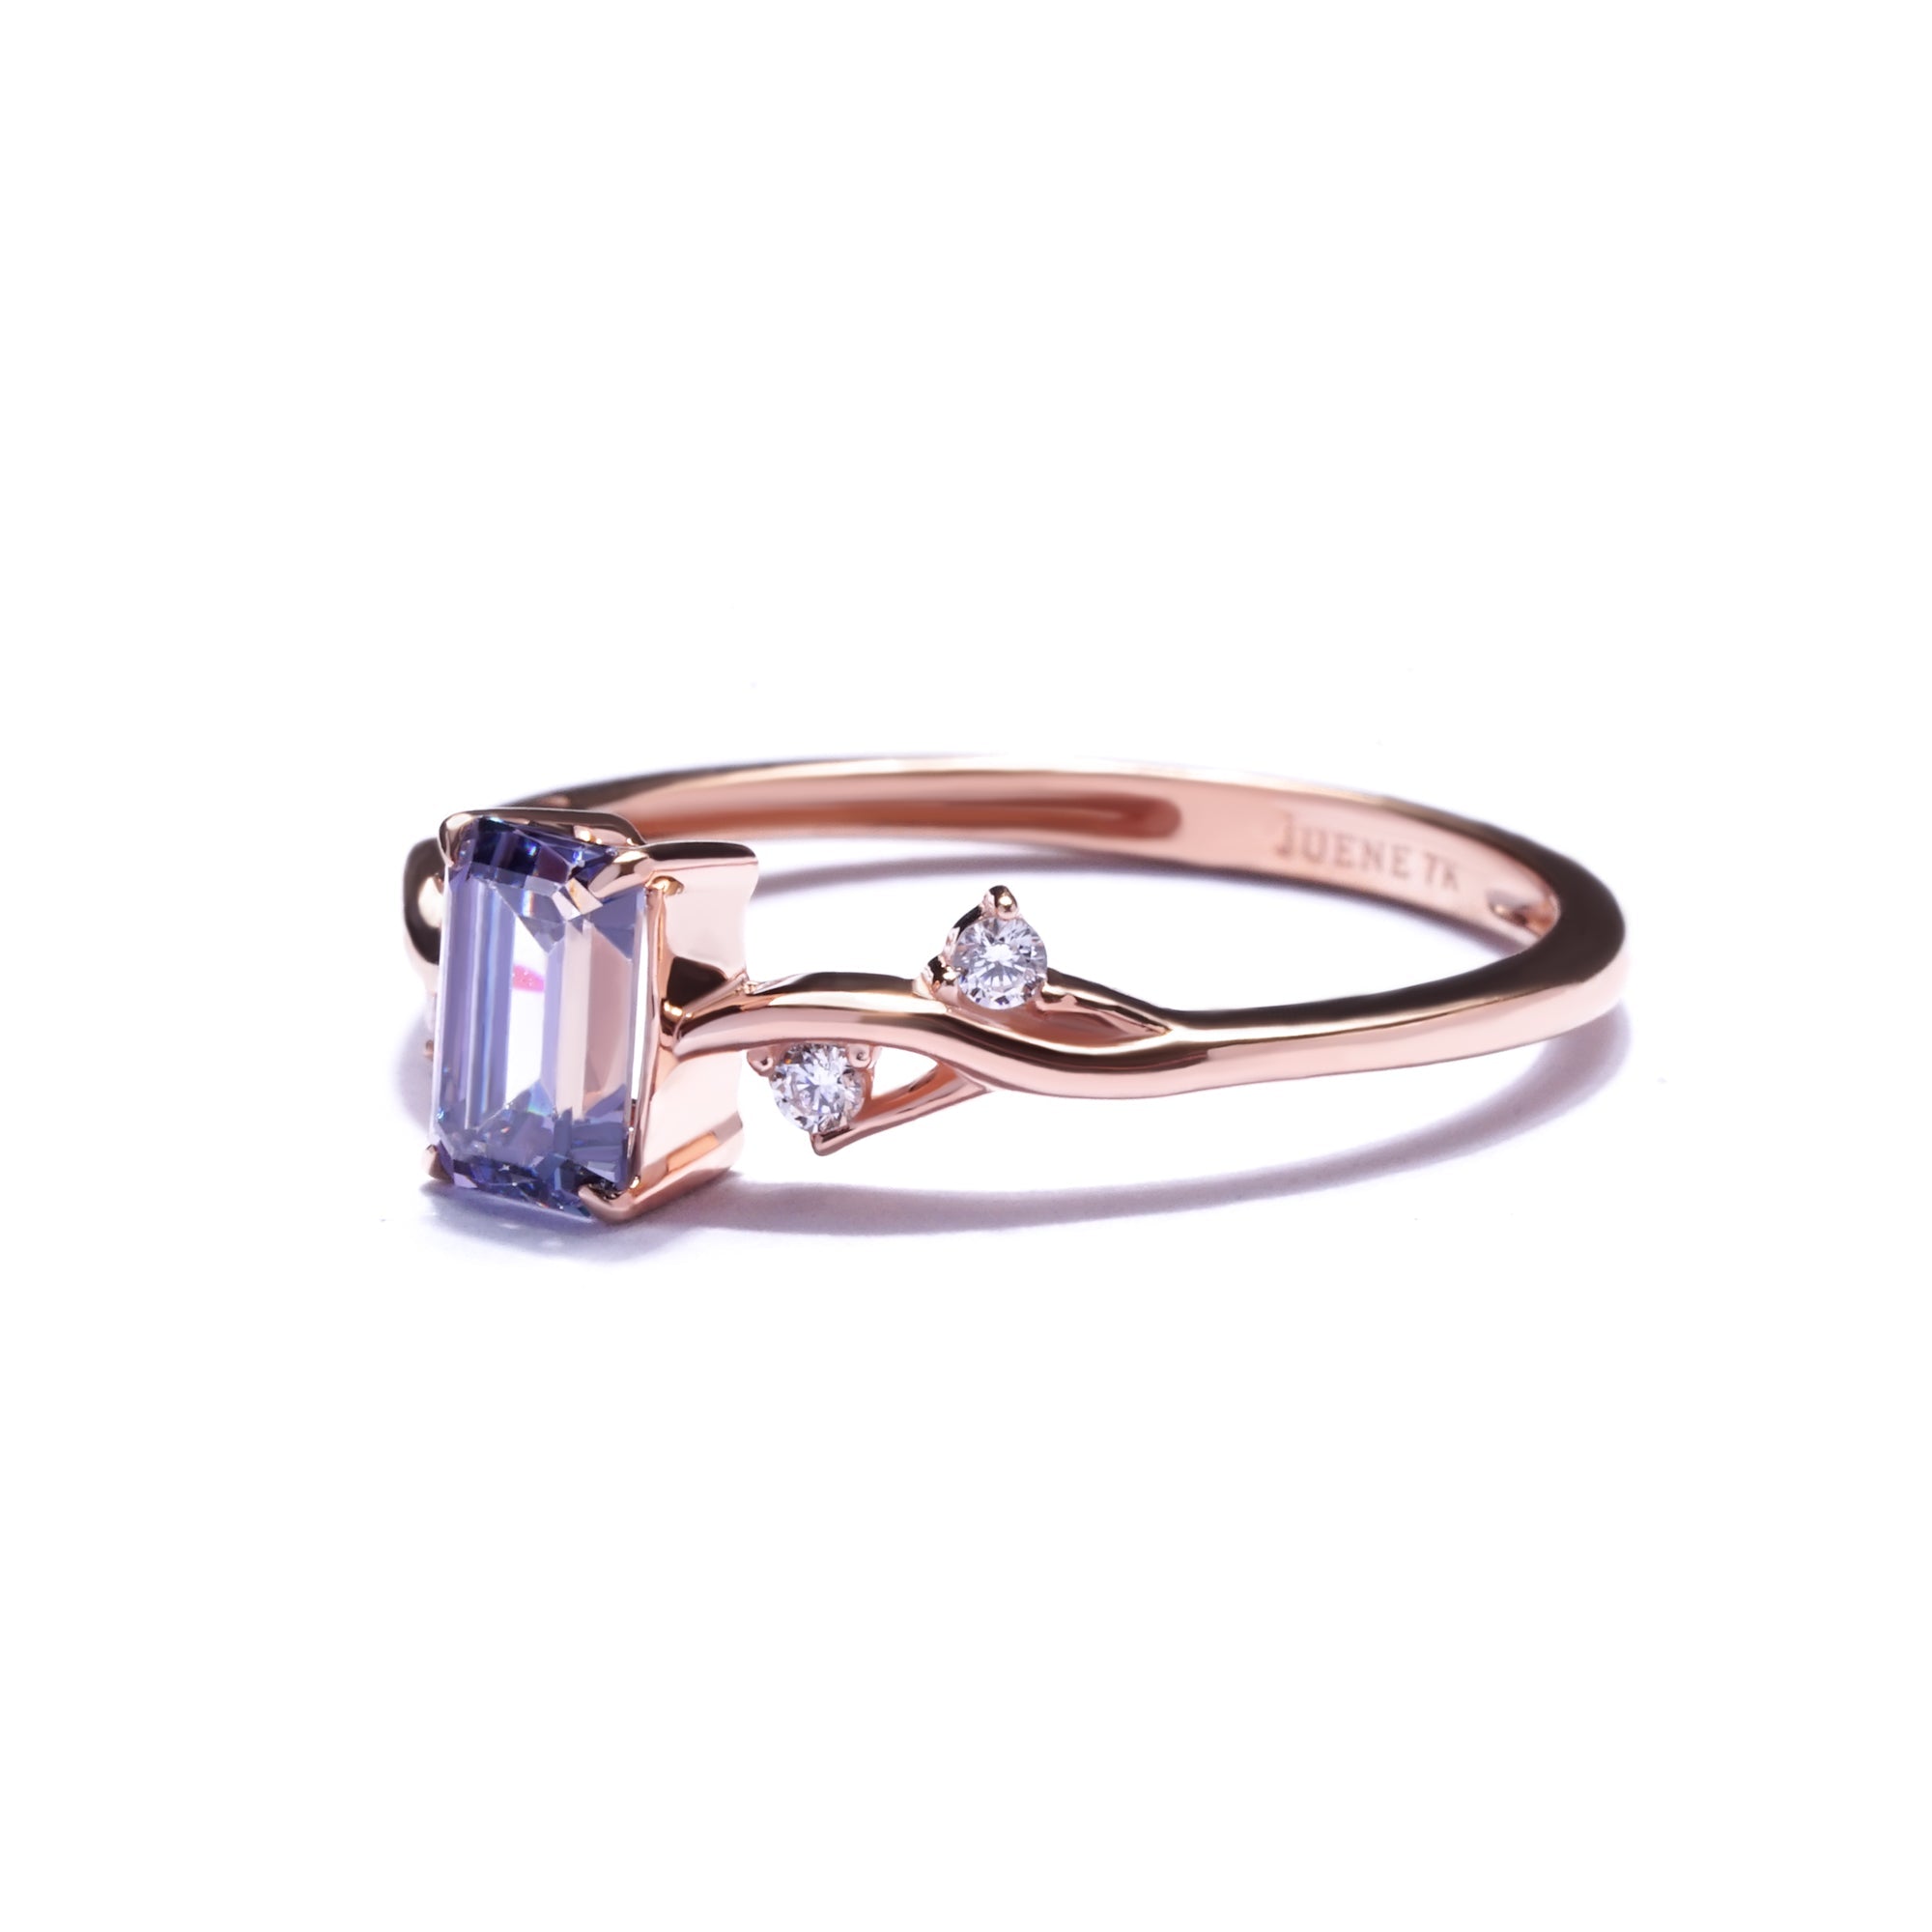 Cassia Gold Ring - Twilight Collection - Juene Jewelry